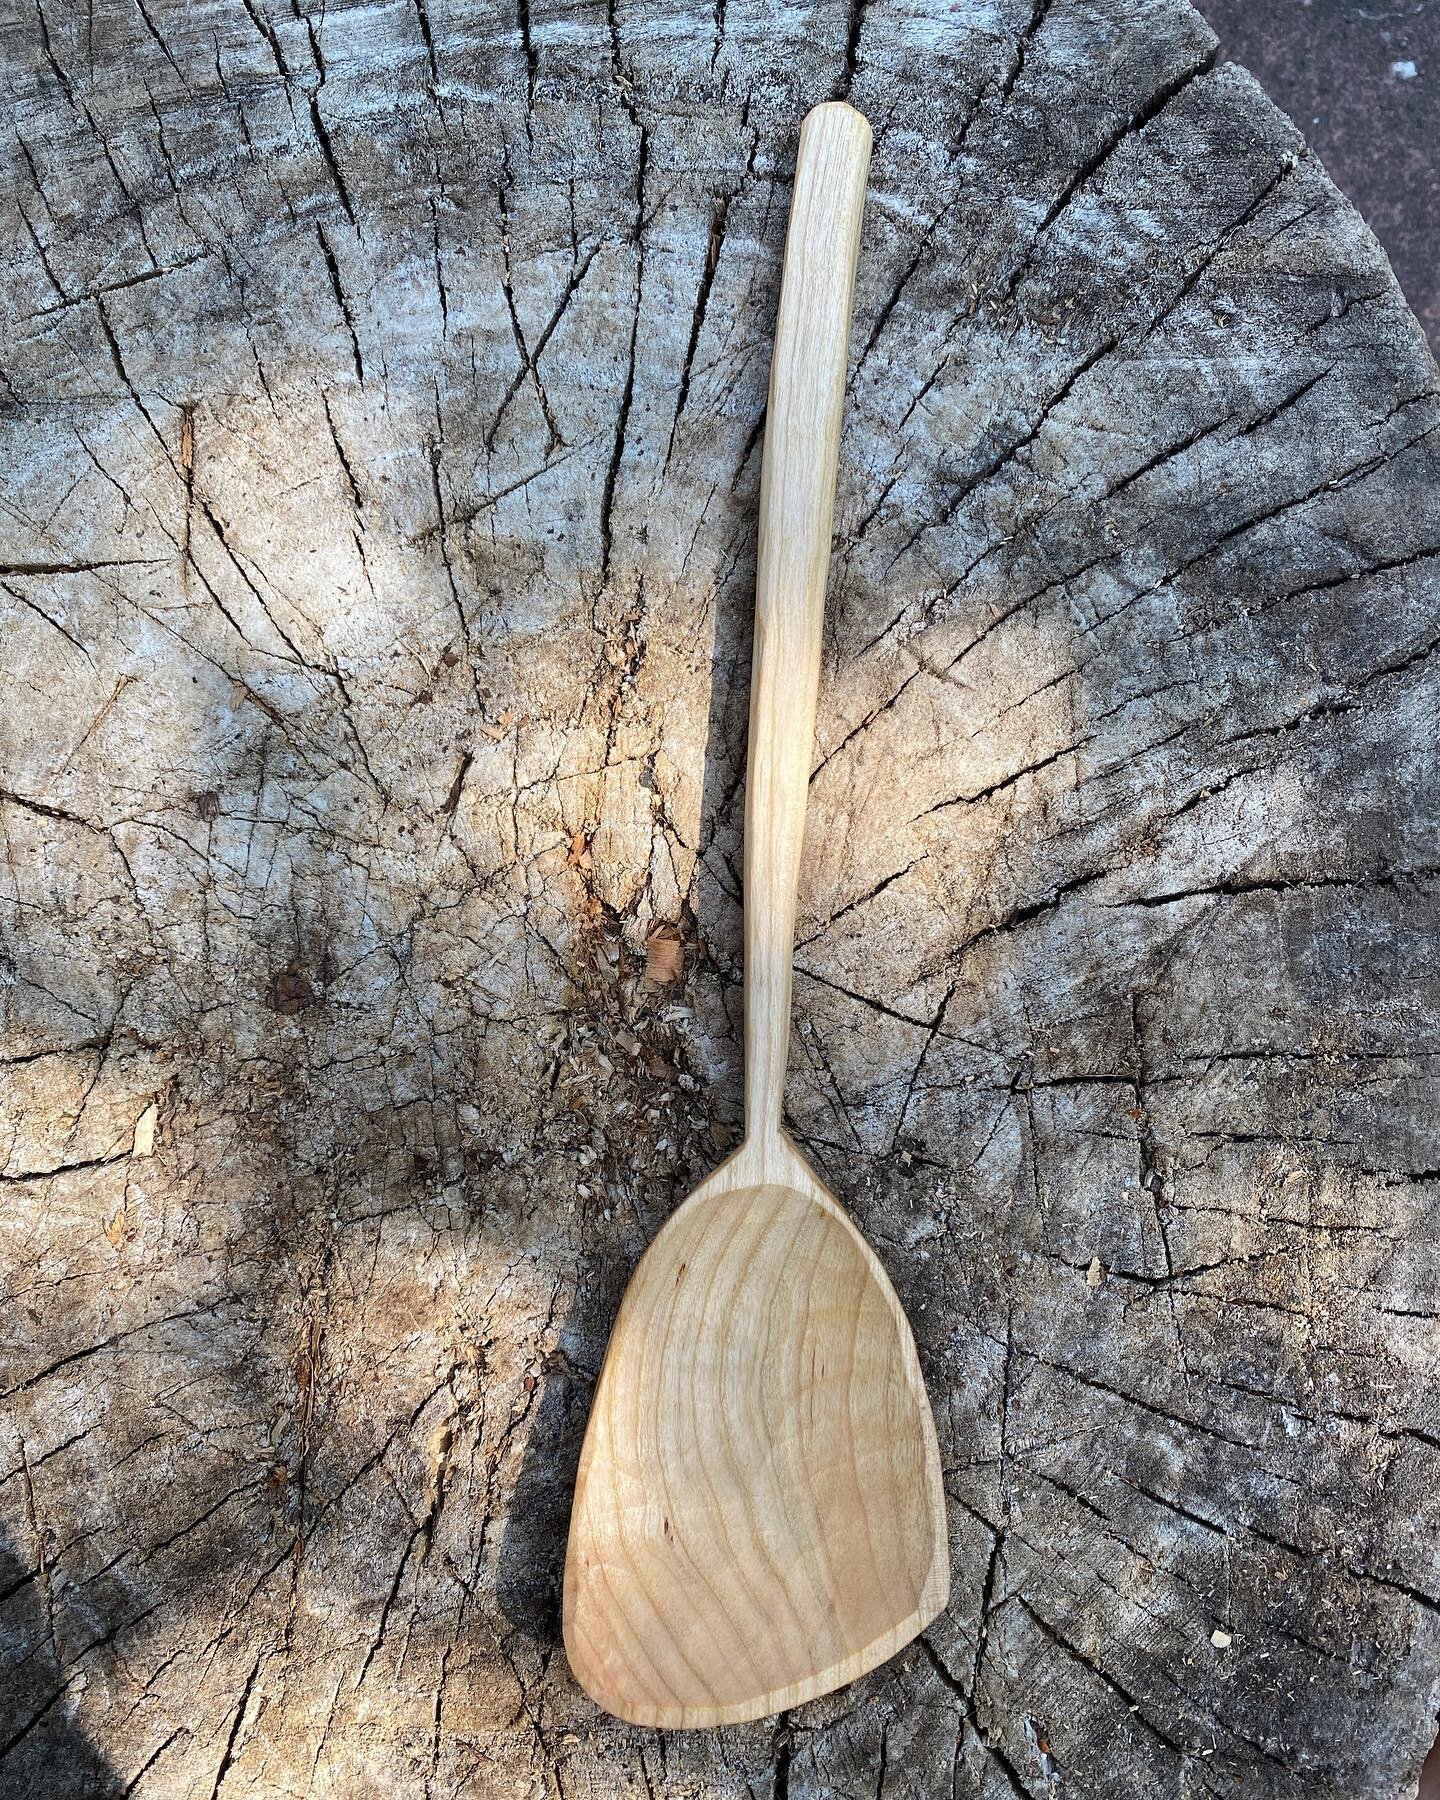 Cherry 🍒spoontula of great magnitude 👍
.
.
.
.
.
.
.
#sloyd #woodworking #greenwoodworking #bushcraft #bellingham #sloydwoodworking #carving #whittling #nature #wildtrees #trees #carve